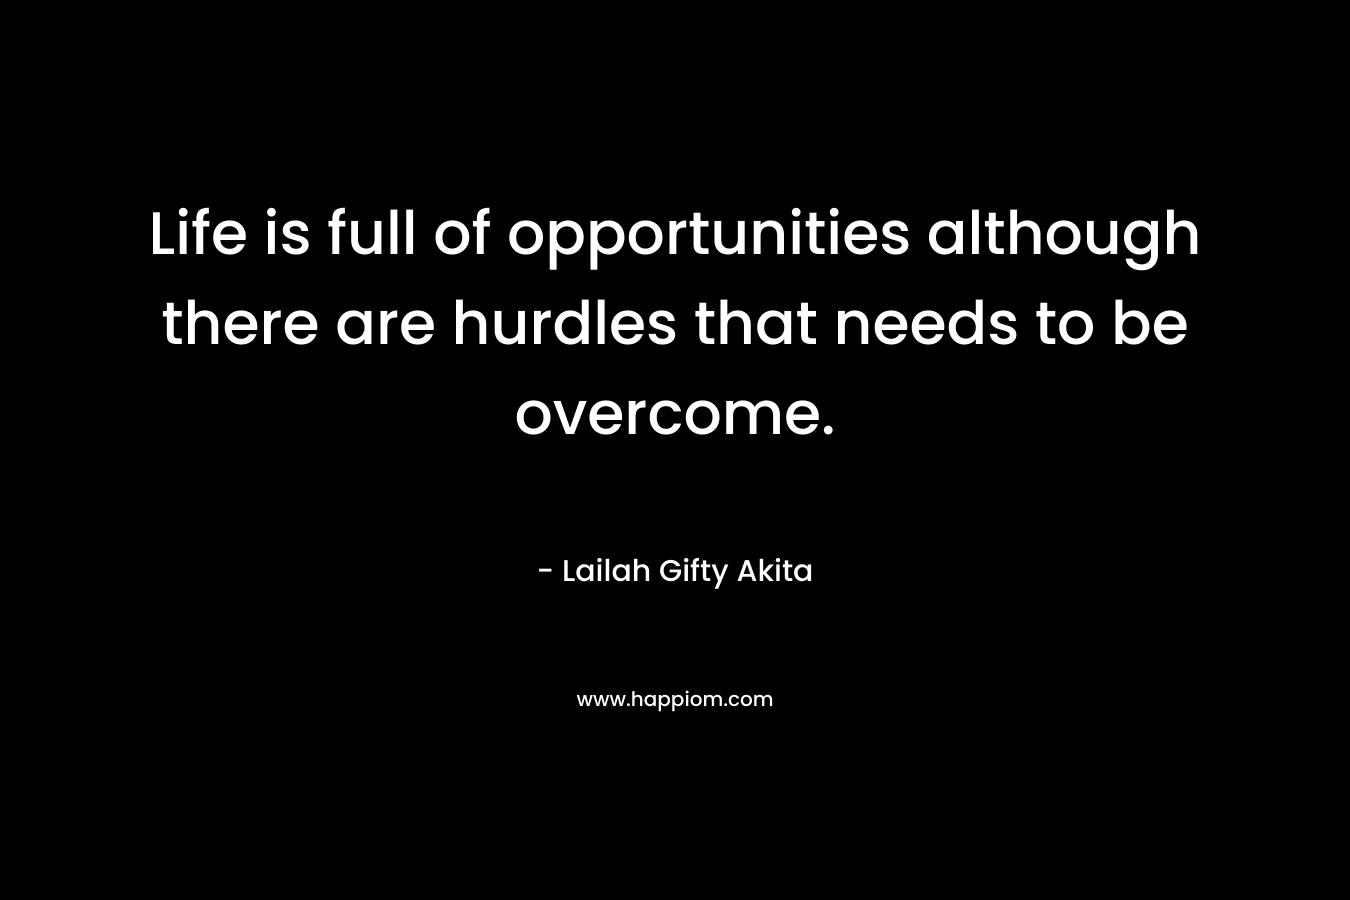 Life is full of opportunities although there are hurdles that needs to be overcome.